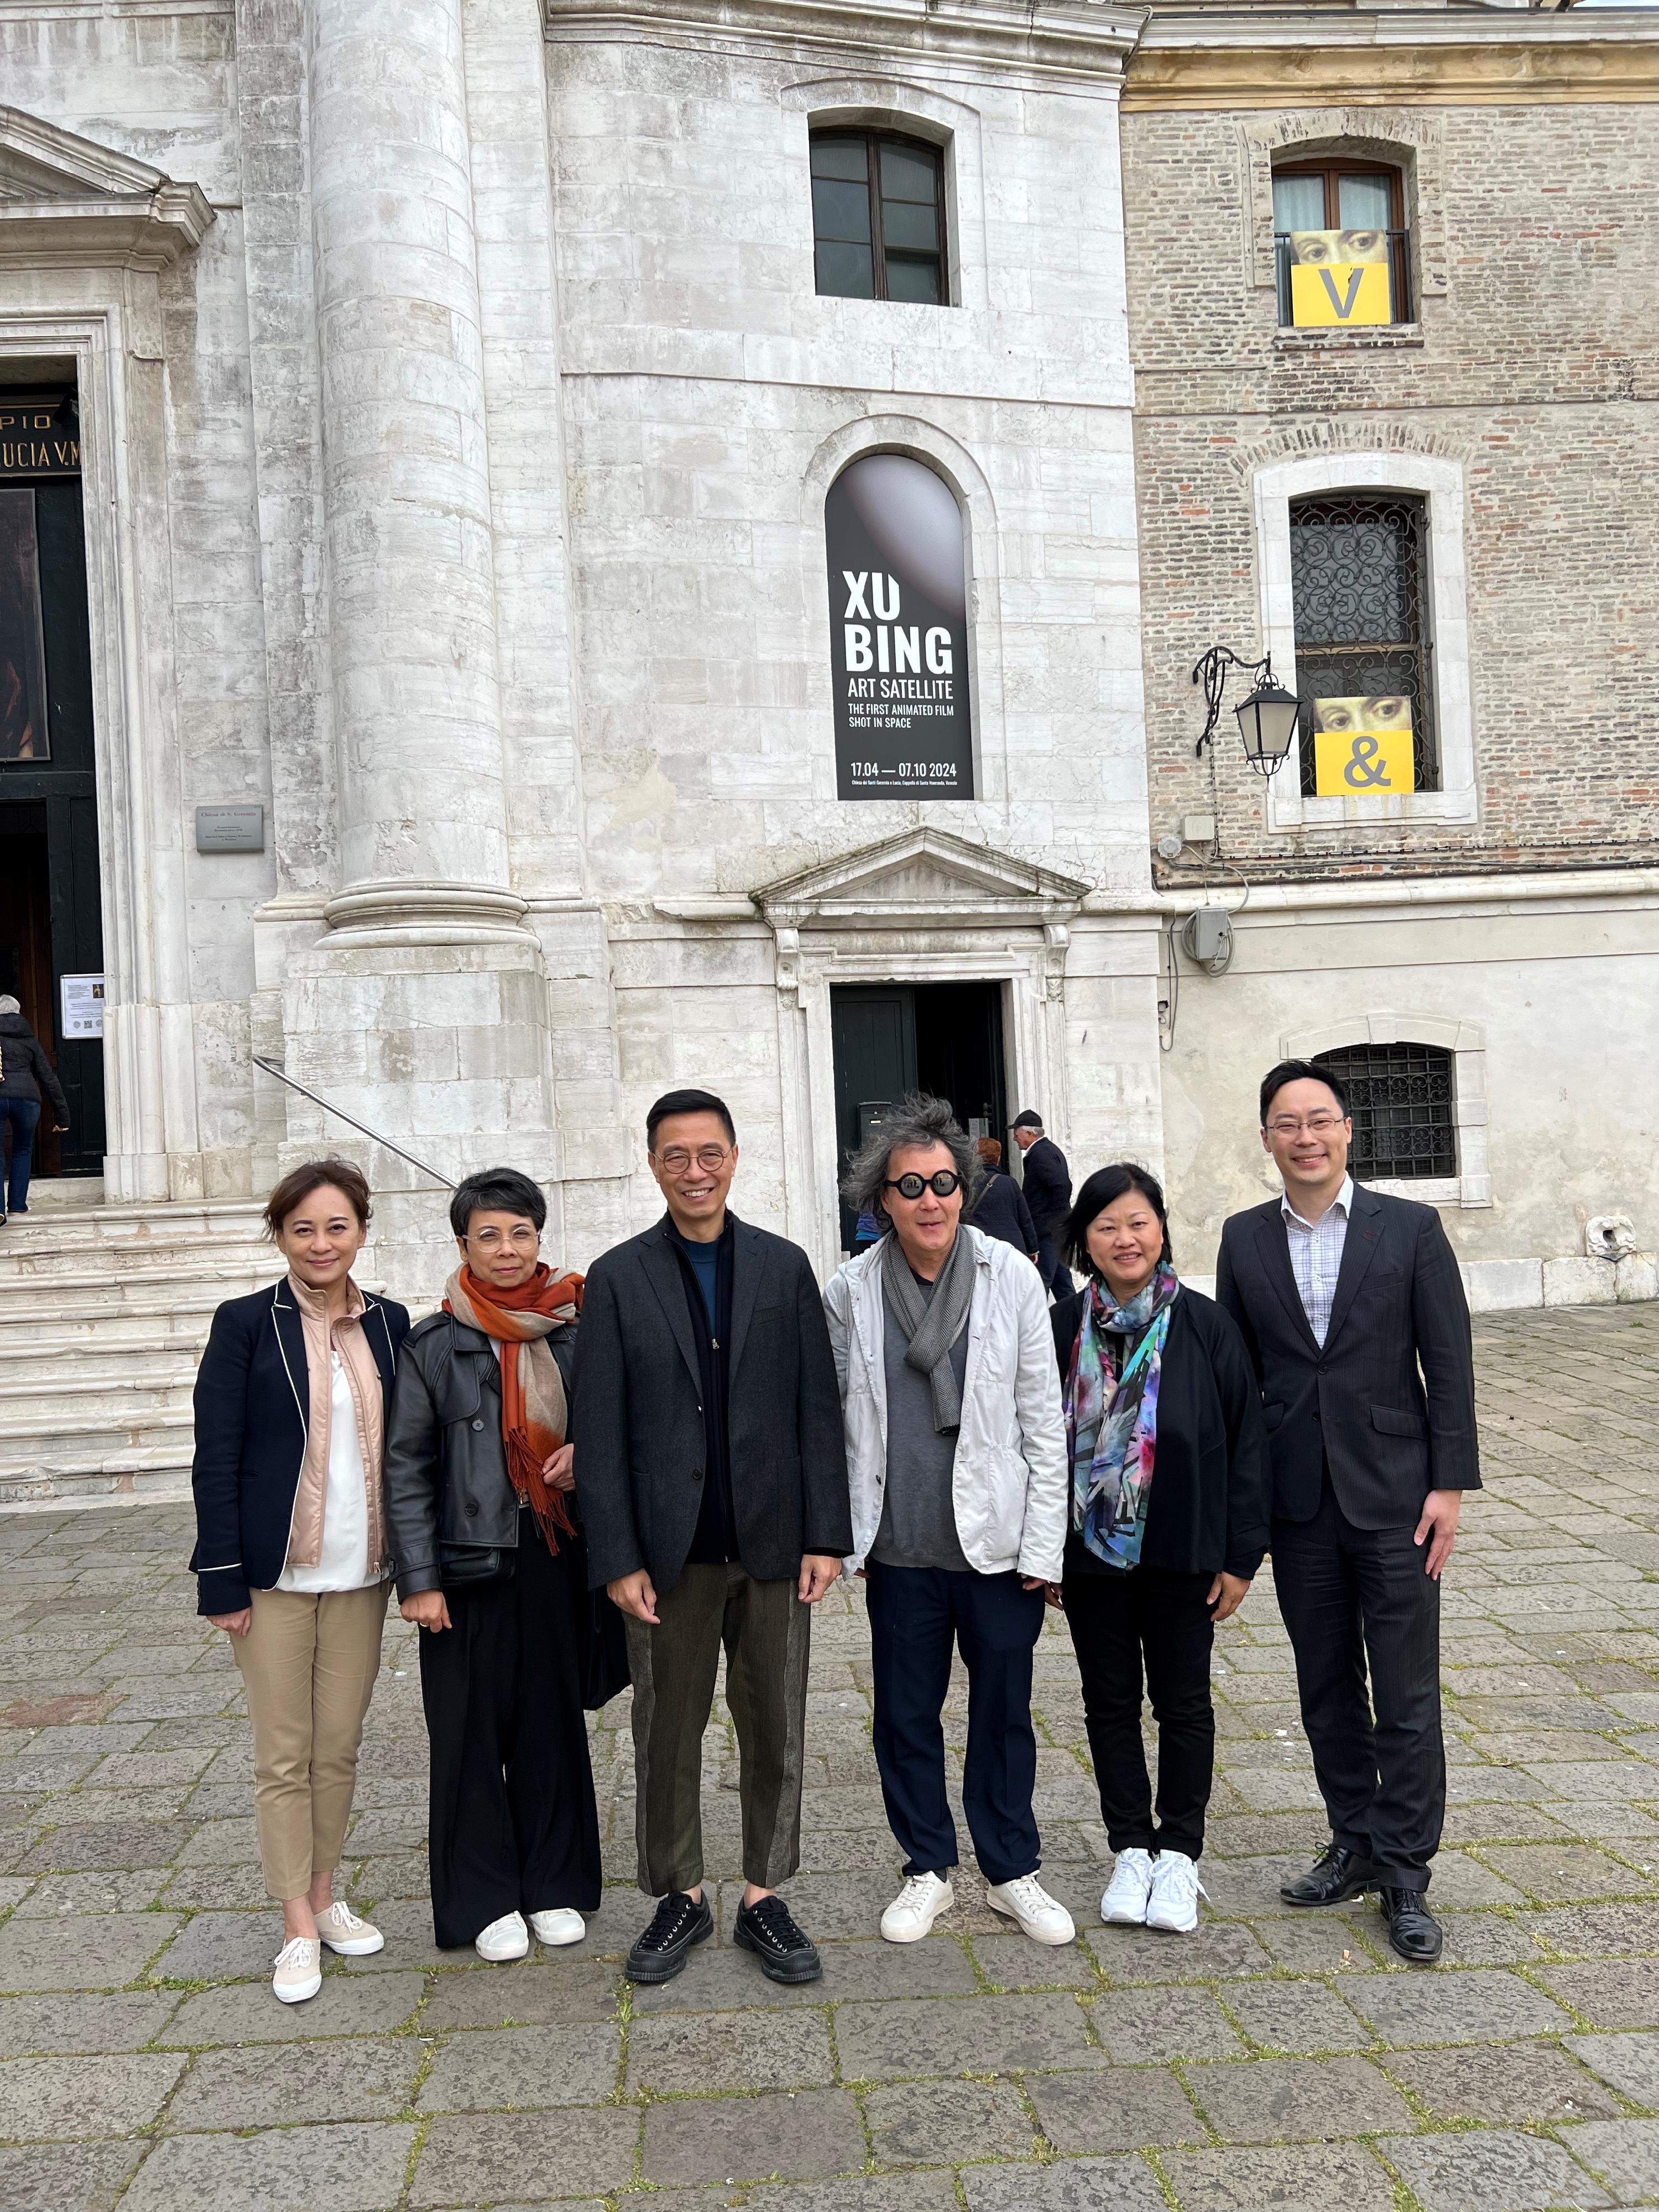 The Secretary for Culture, Sports and Tourism, Mr Kevin Yeung (third left), took a photo with the Ambassador for Cultural Promotion appointed by the Culture, Sports and Tourism Bureau, Mr Xu Bing (third right) after visiting Mr Xu’s art exhibition, at the Venice Biennale in Venice, Italy, today (April 20, Venice time).